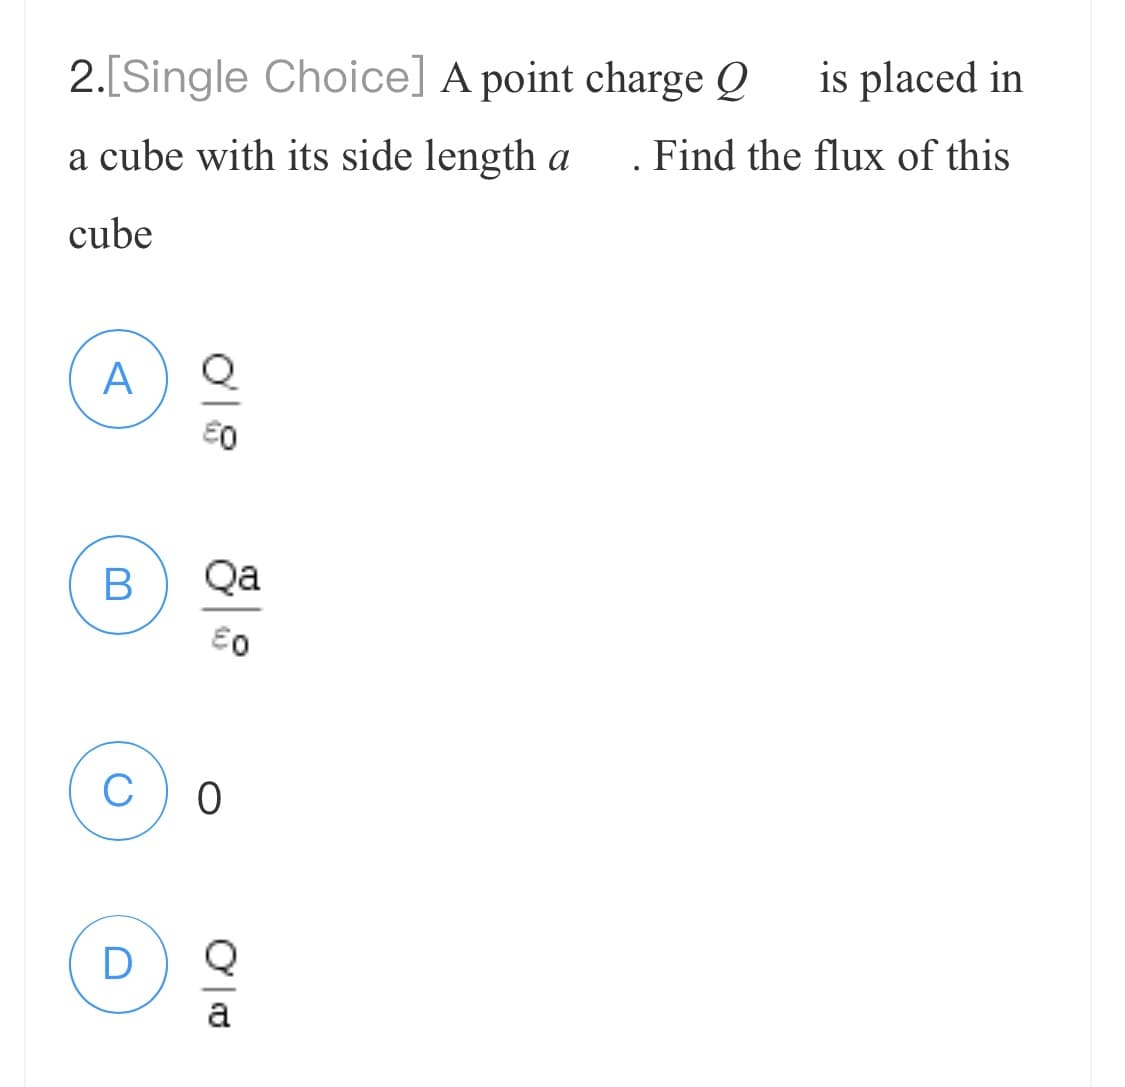 2.[Single Choice] A point charge Q
a cube with its side length a
cube
A
B
08
D
Qa
€0
C 0
Oo
is placed in
Find the flux of this